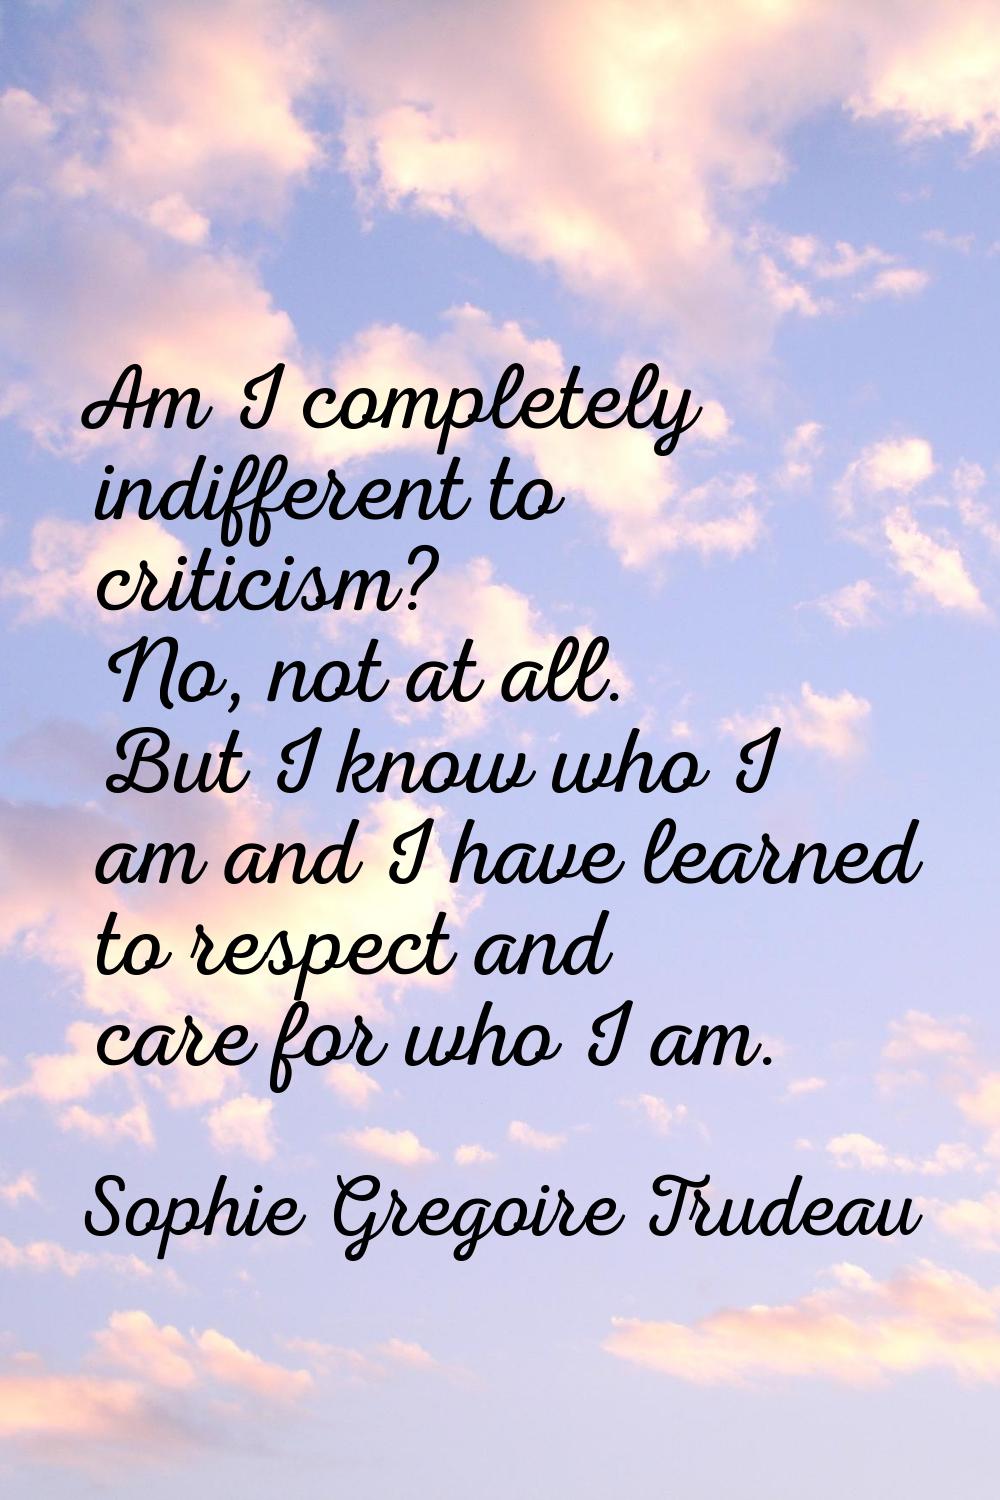 Am I completely indifferent to criticism? No, not at all. But I know who I am and I have learned to